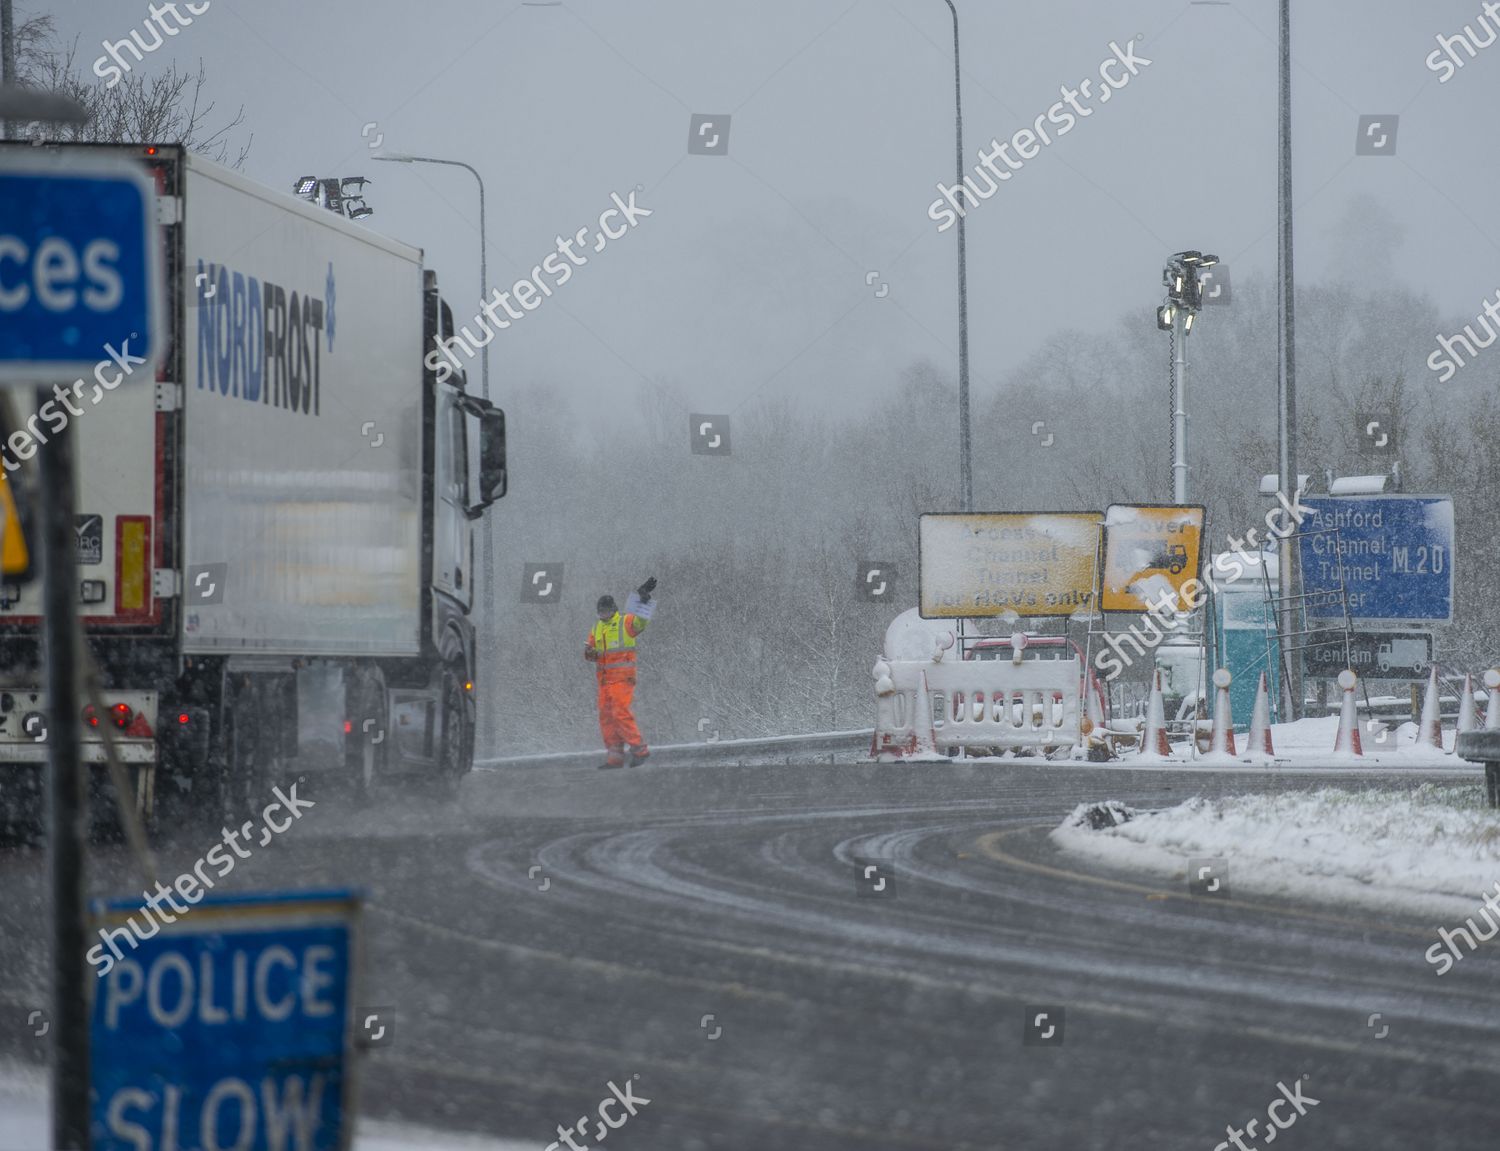 Beast East Twoan Amber Snow Warning Meaning Editorial Stock Photo Stock Image Shutterstock